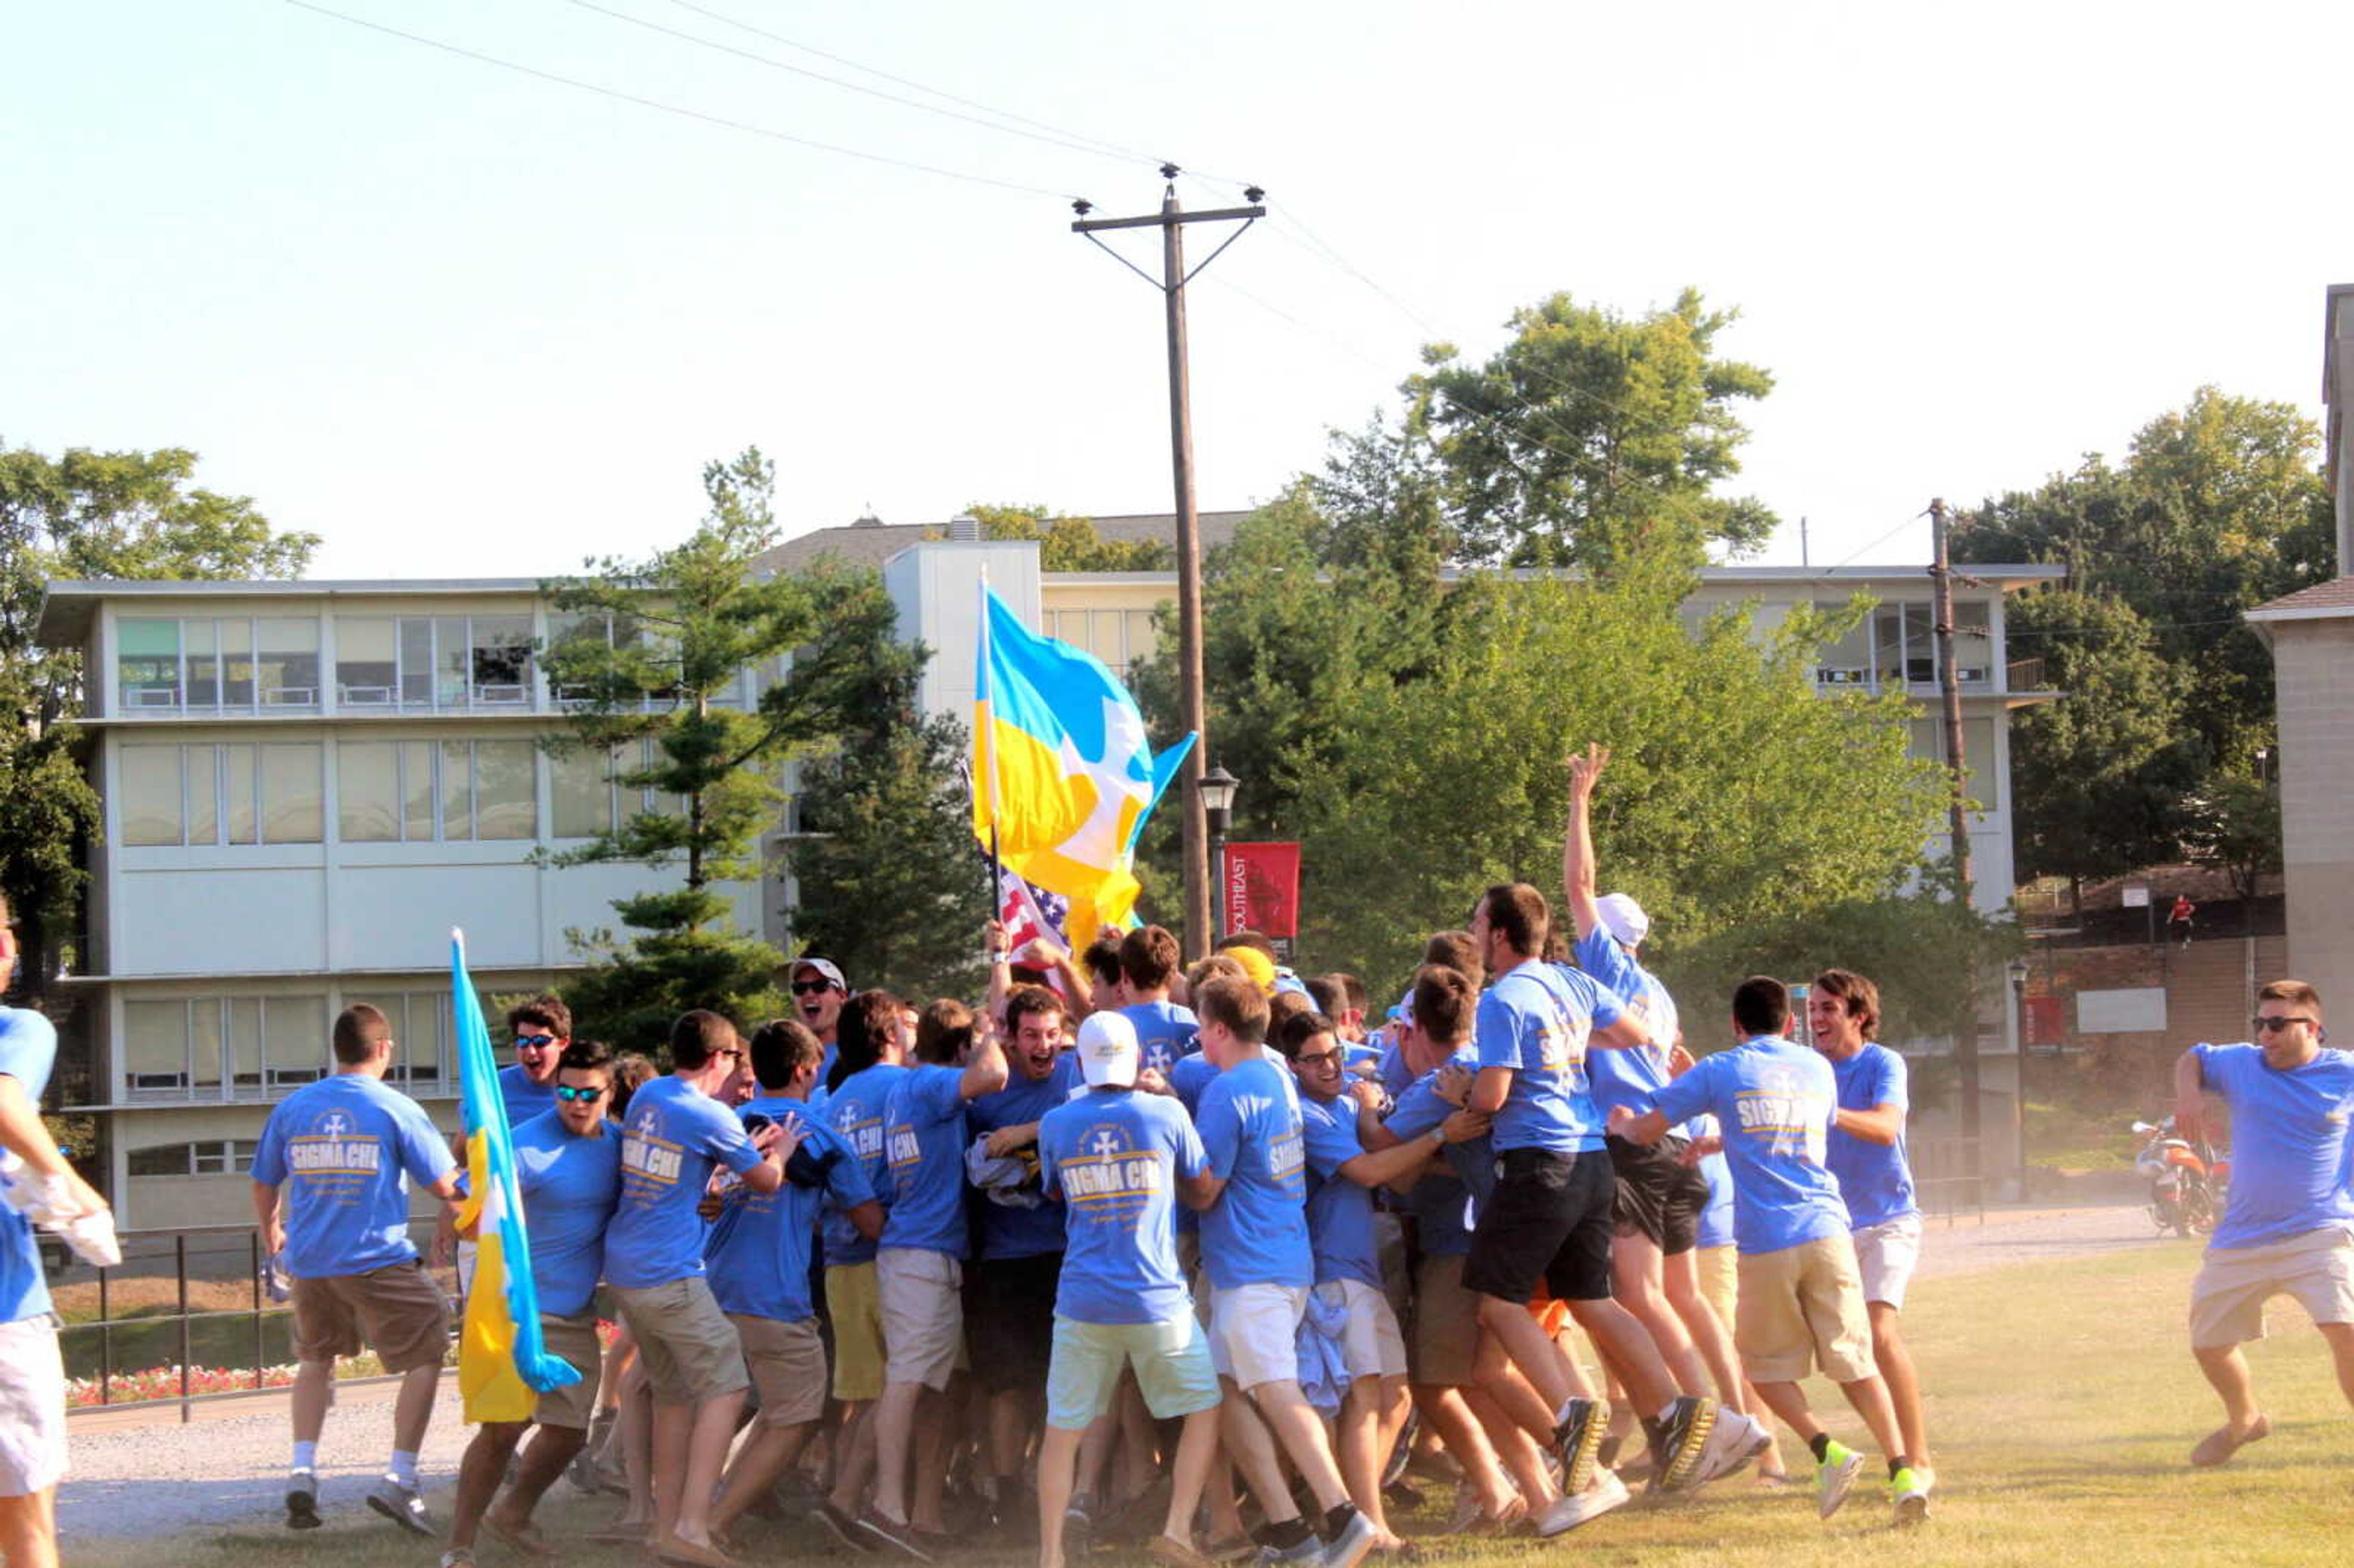 Sigma Chi fraternity members meet their new pledges on Bid Day, Sept. 6. Photo by Jami Black